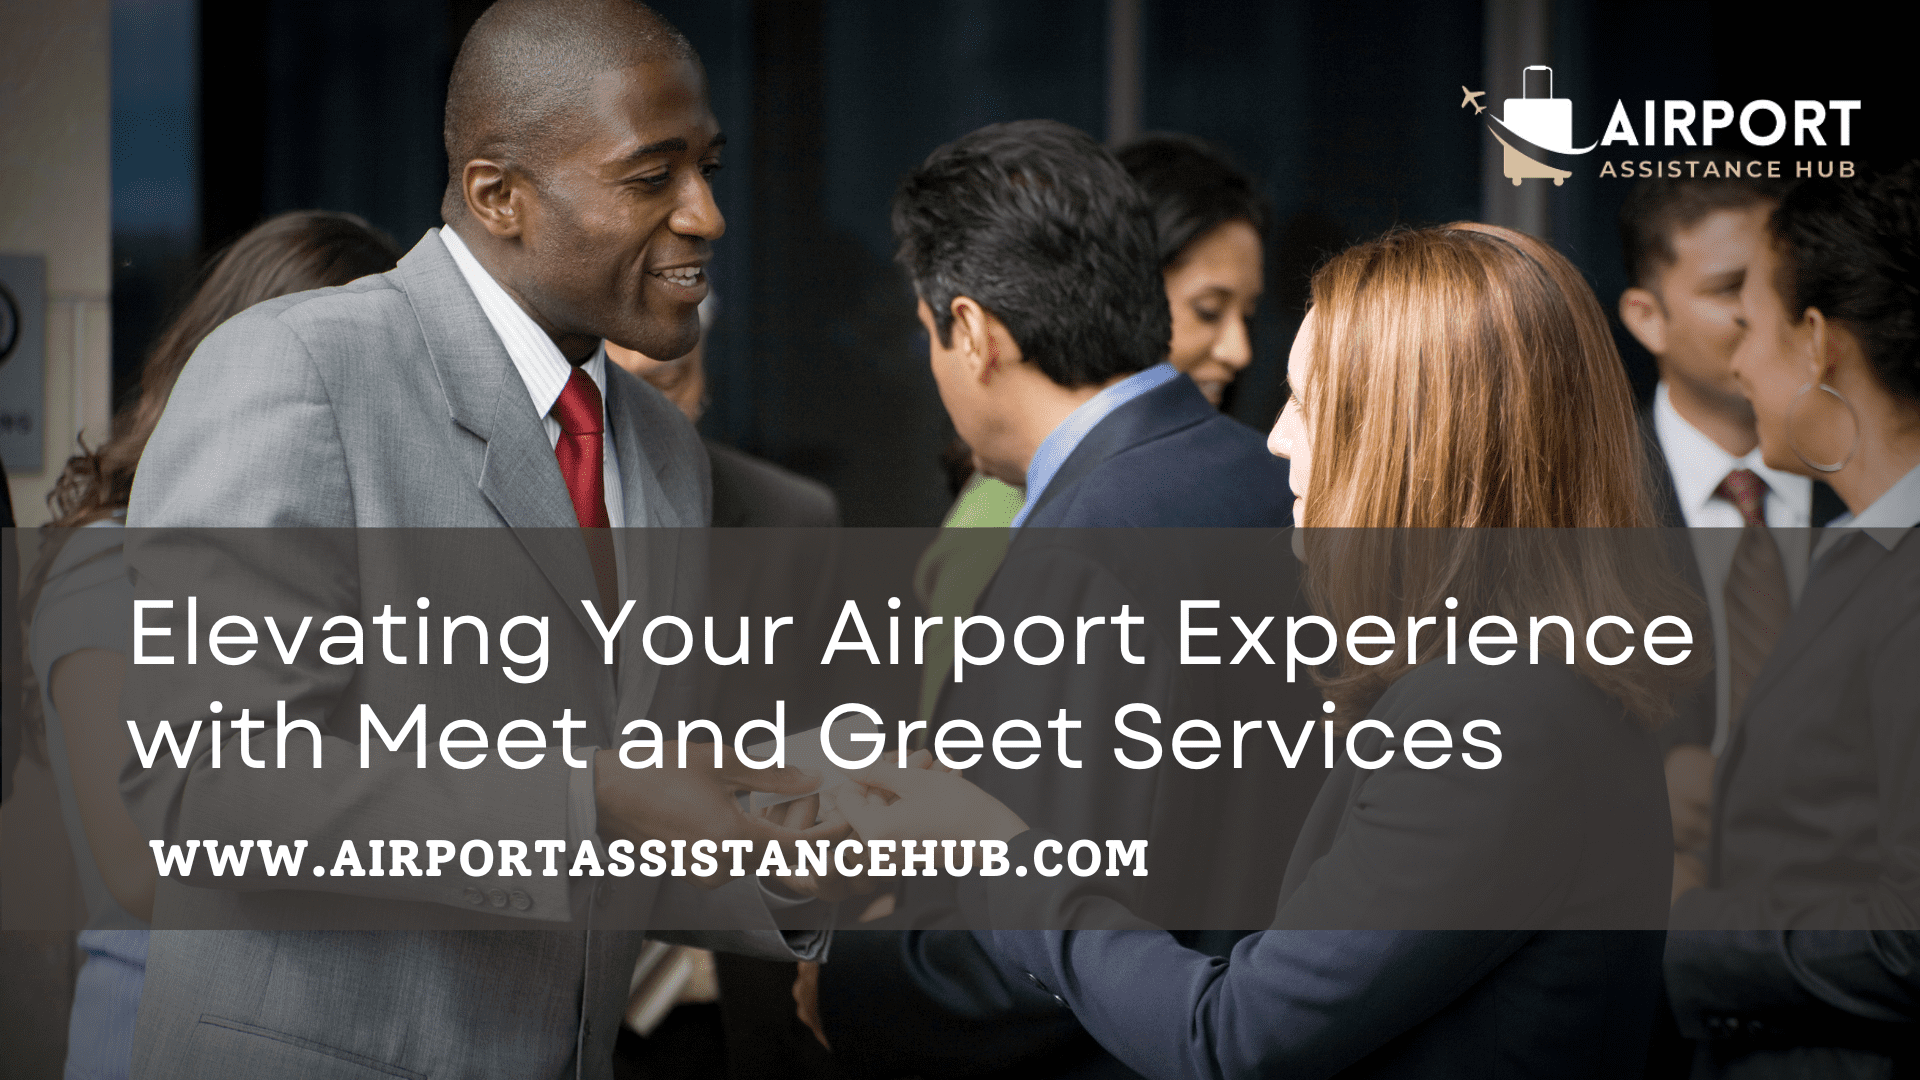 Elevating Your Airport Experience with Meet and Greet Services